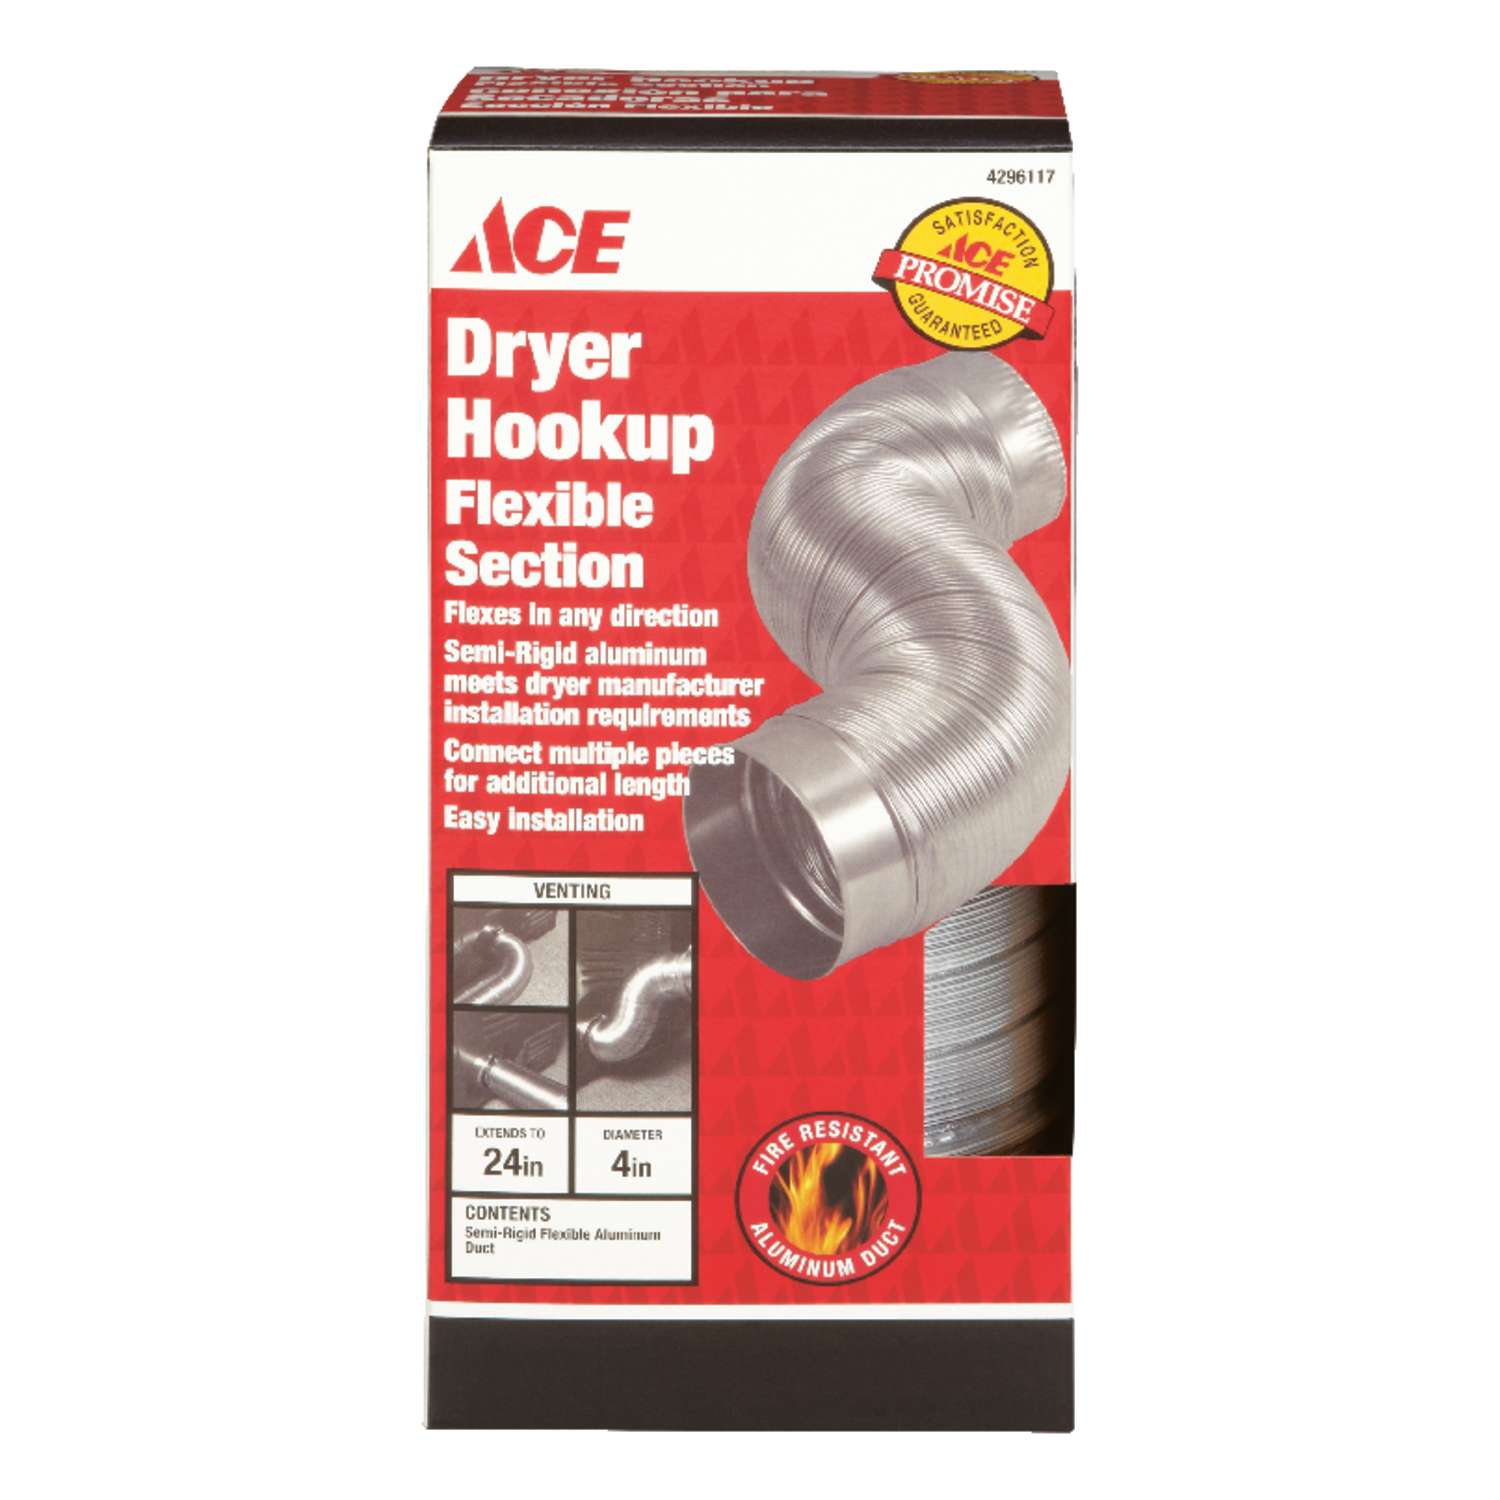 NEW ACE Silver/White Aluminum Dryer Vent Duct 4" x 20' ACEF0420B 